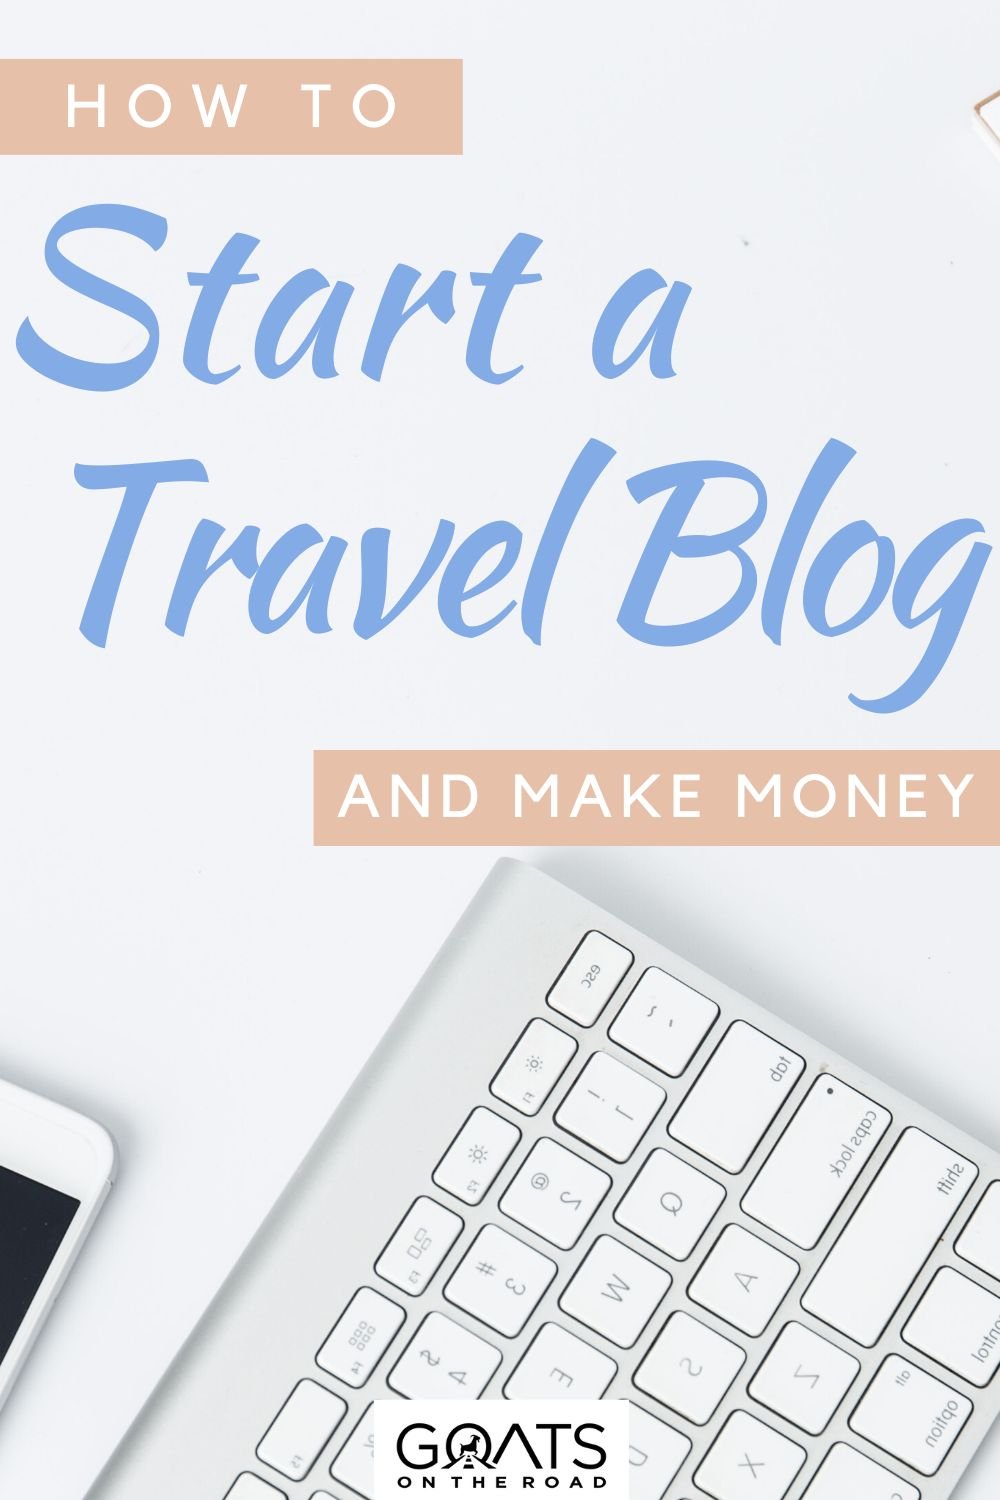 “How To Start A Travel Blog And Make Money